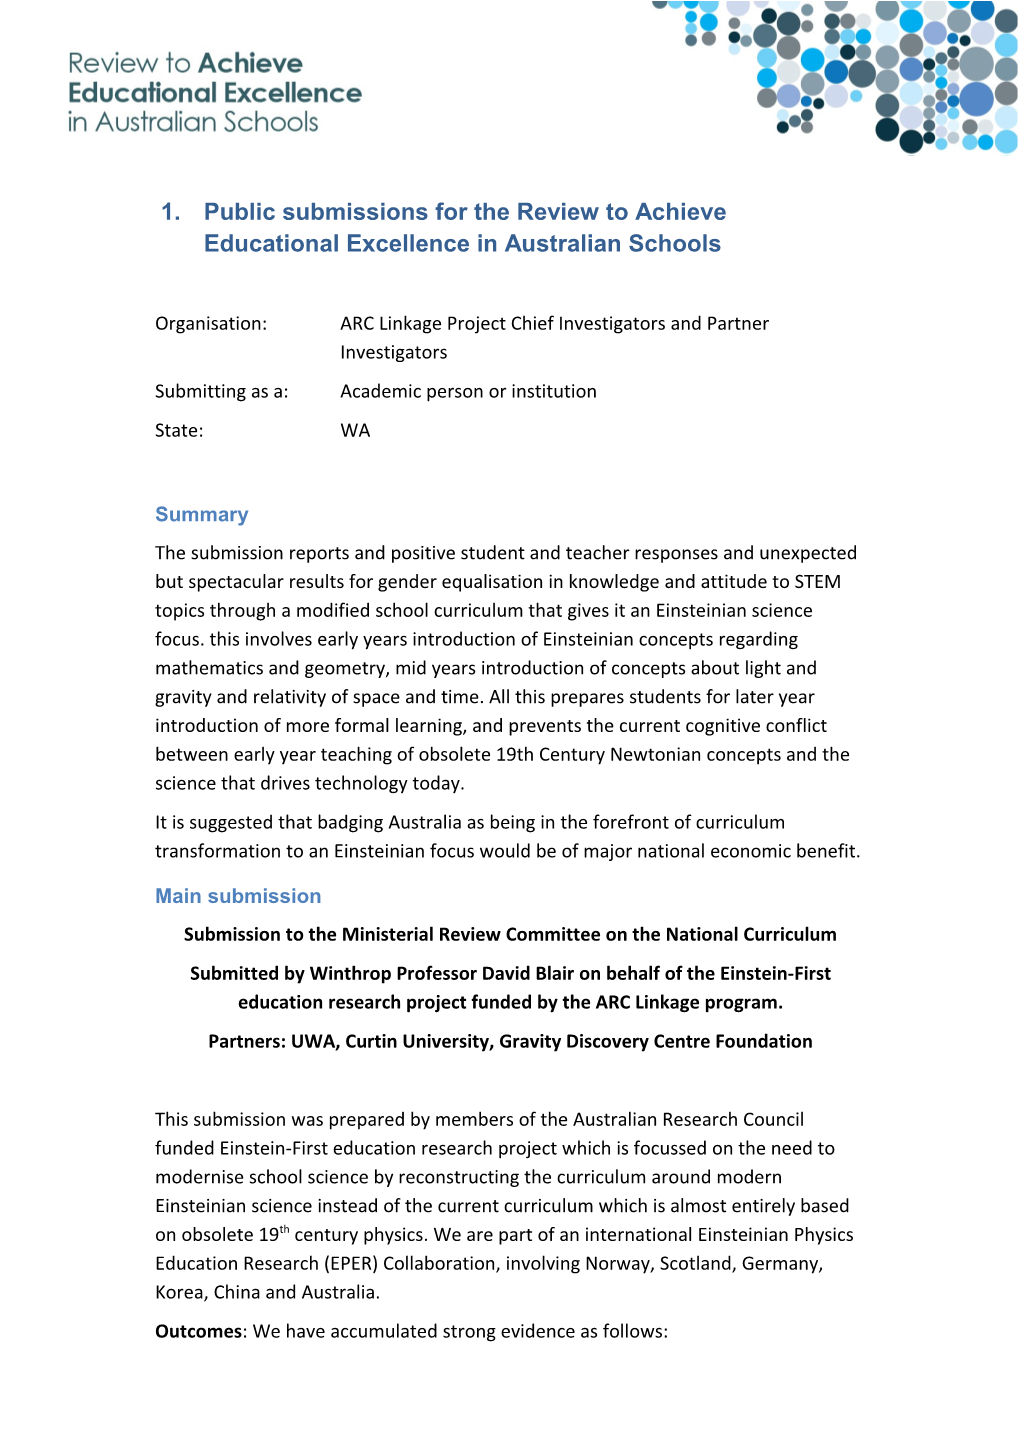 Public Submissions for the Review to Achieve Educational Excellence in Australian Schools